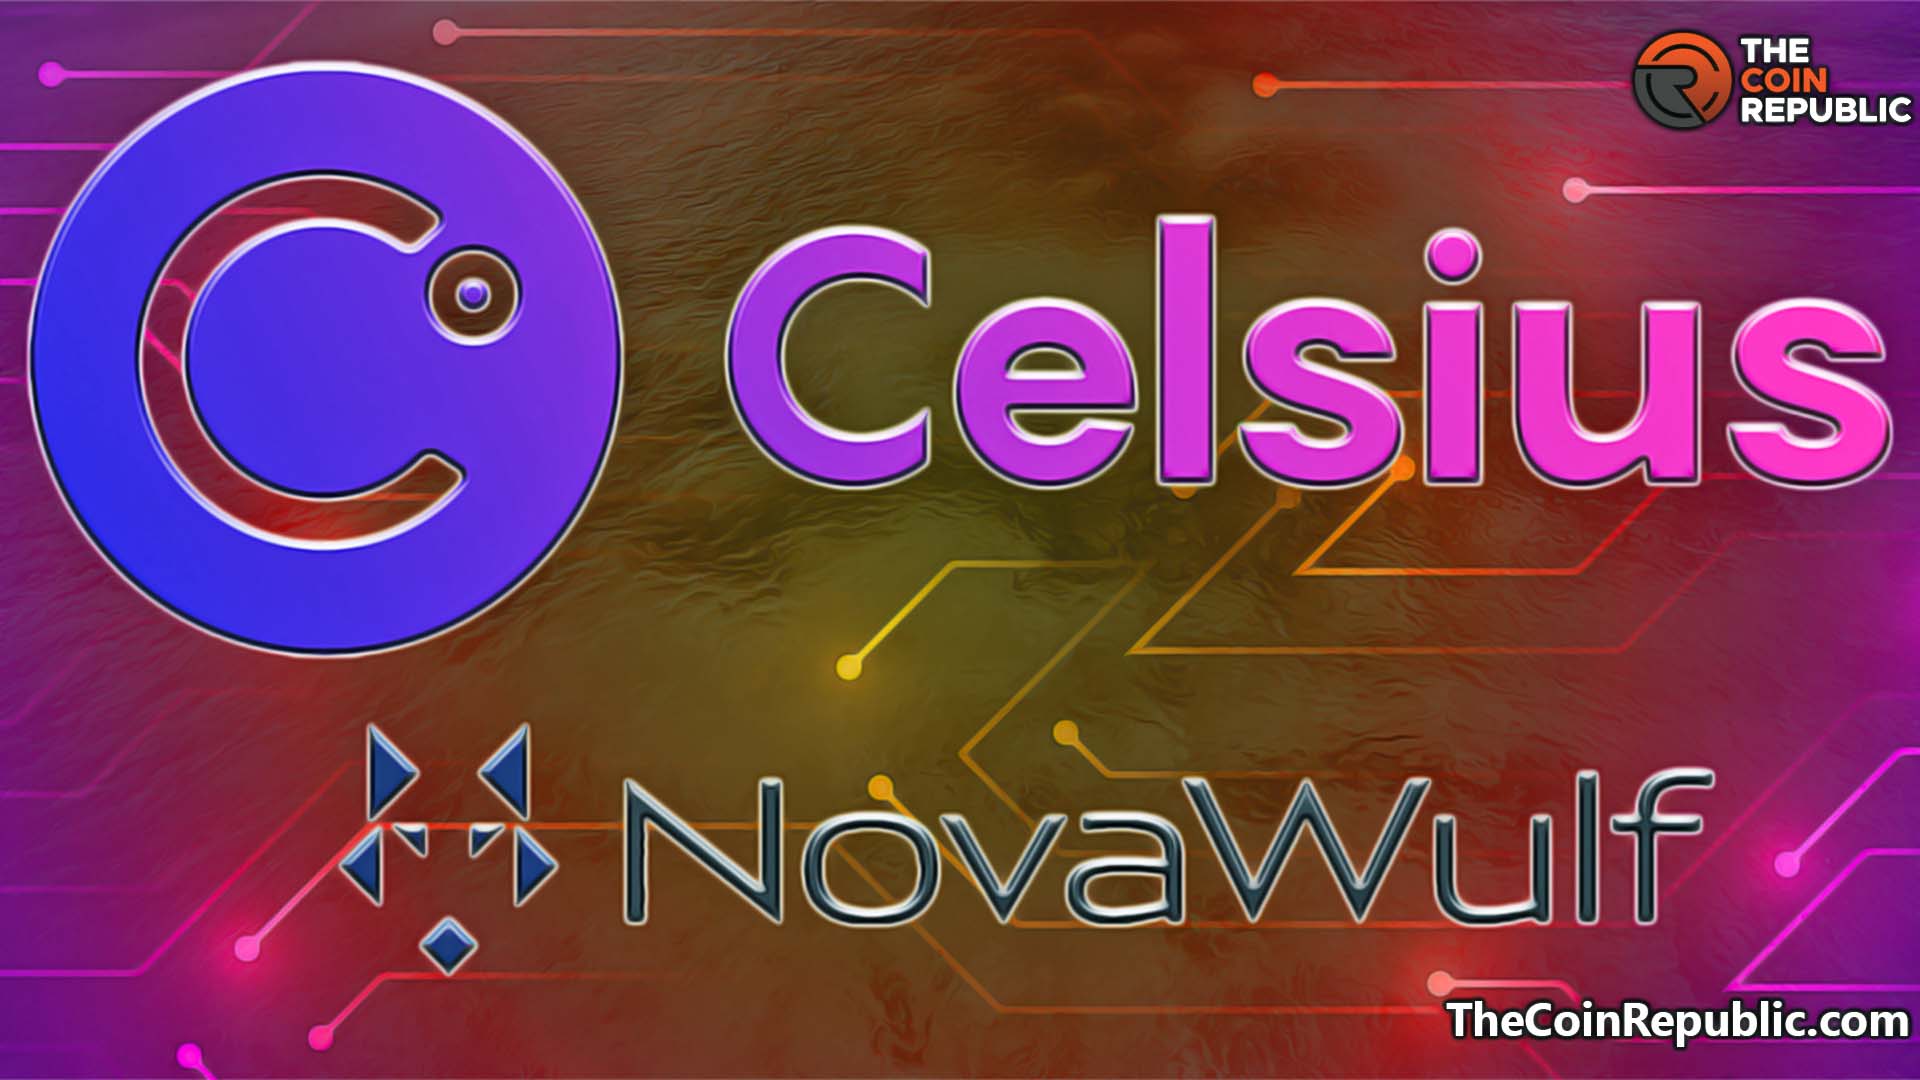 NovaWulf will be Celsius Network’s Bidder and Plan Sponsor